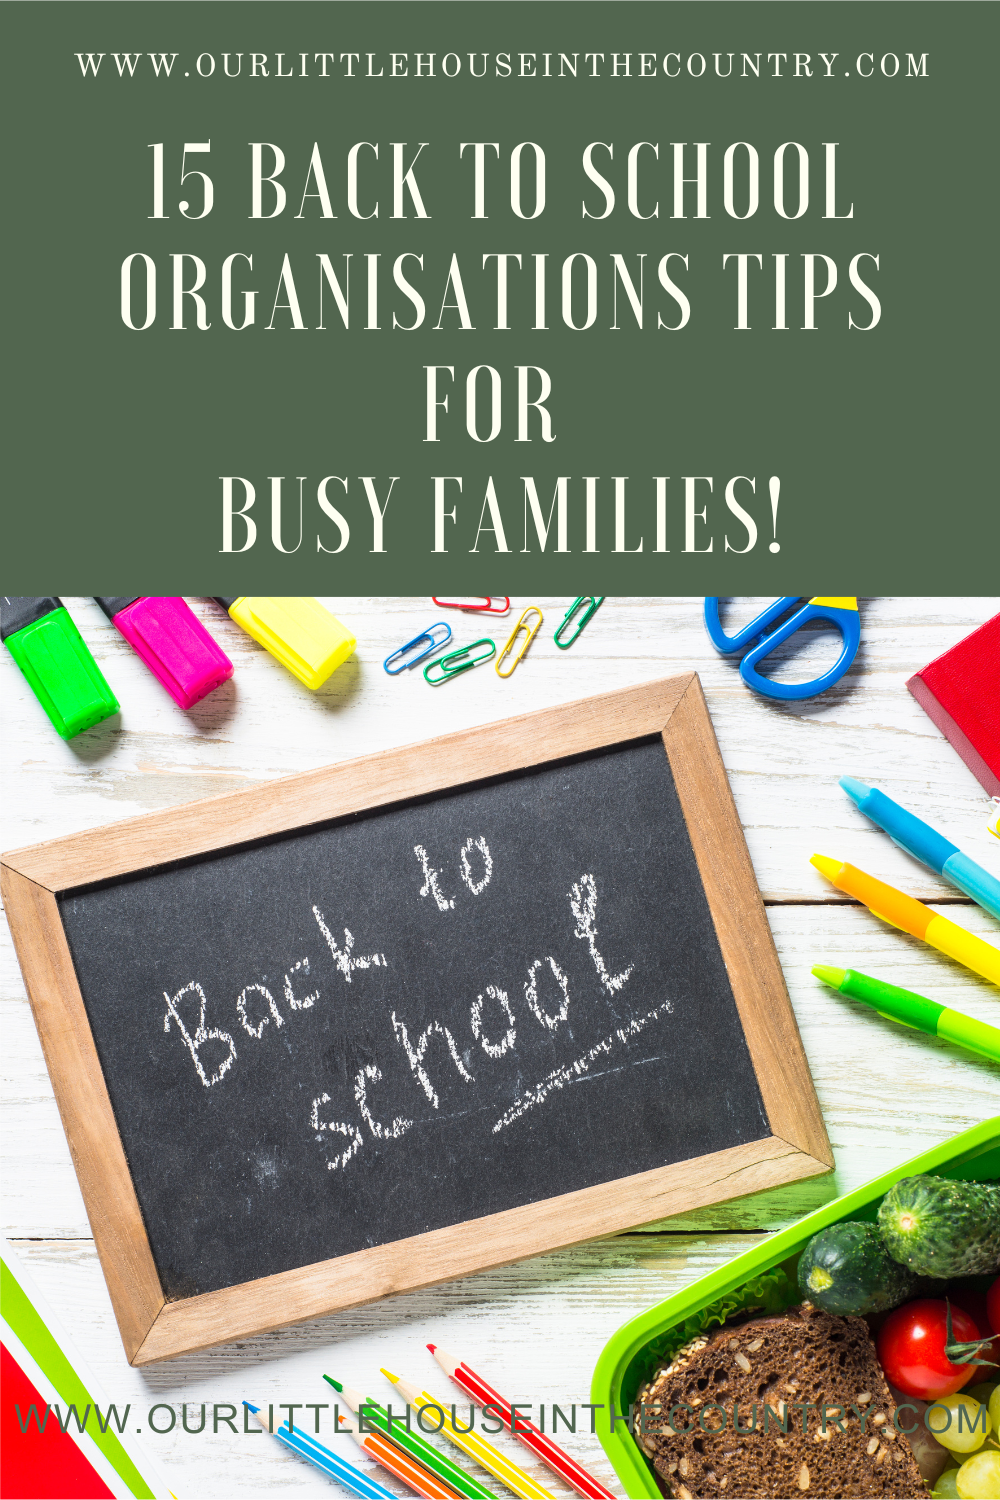 Back to School Organisation Tips for Busy Families